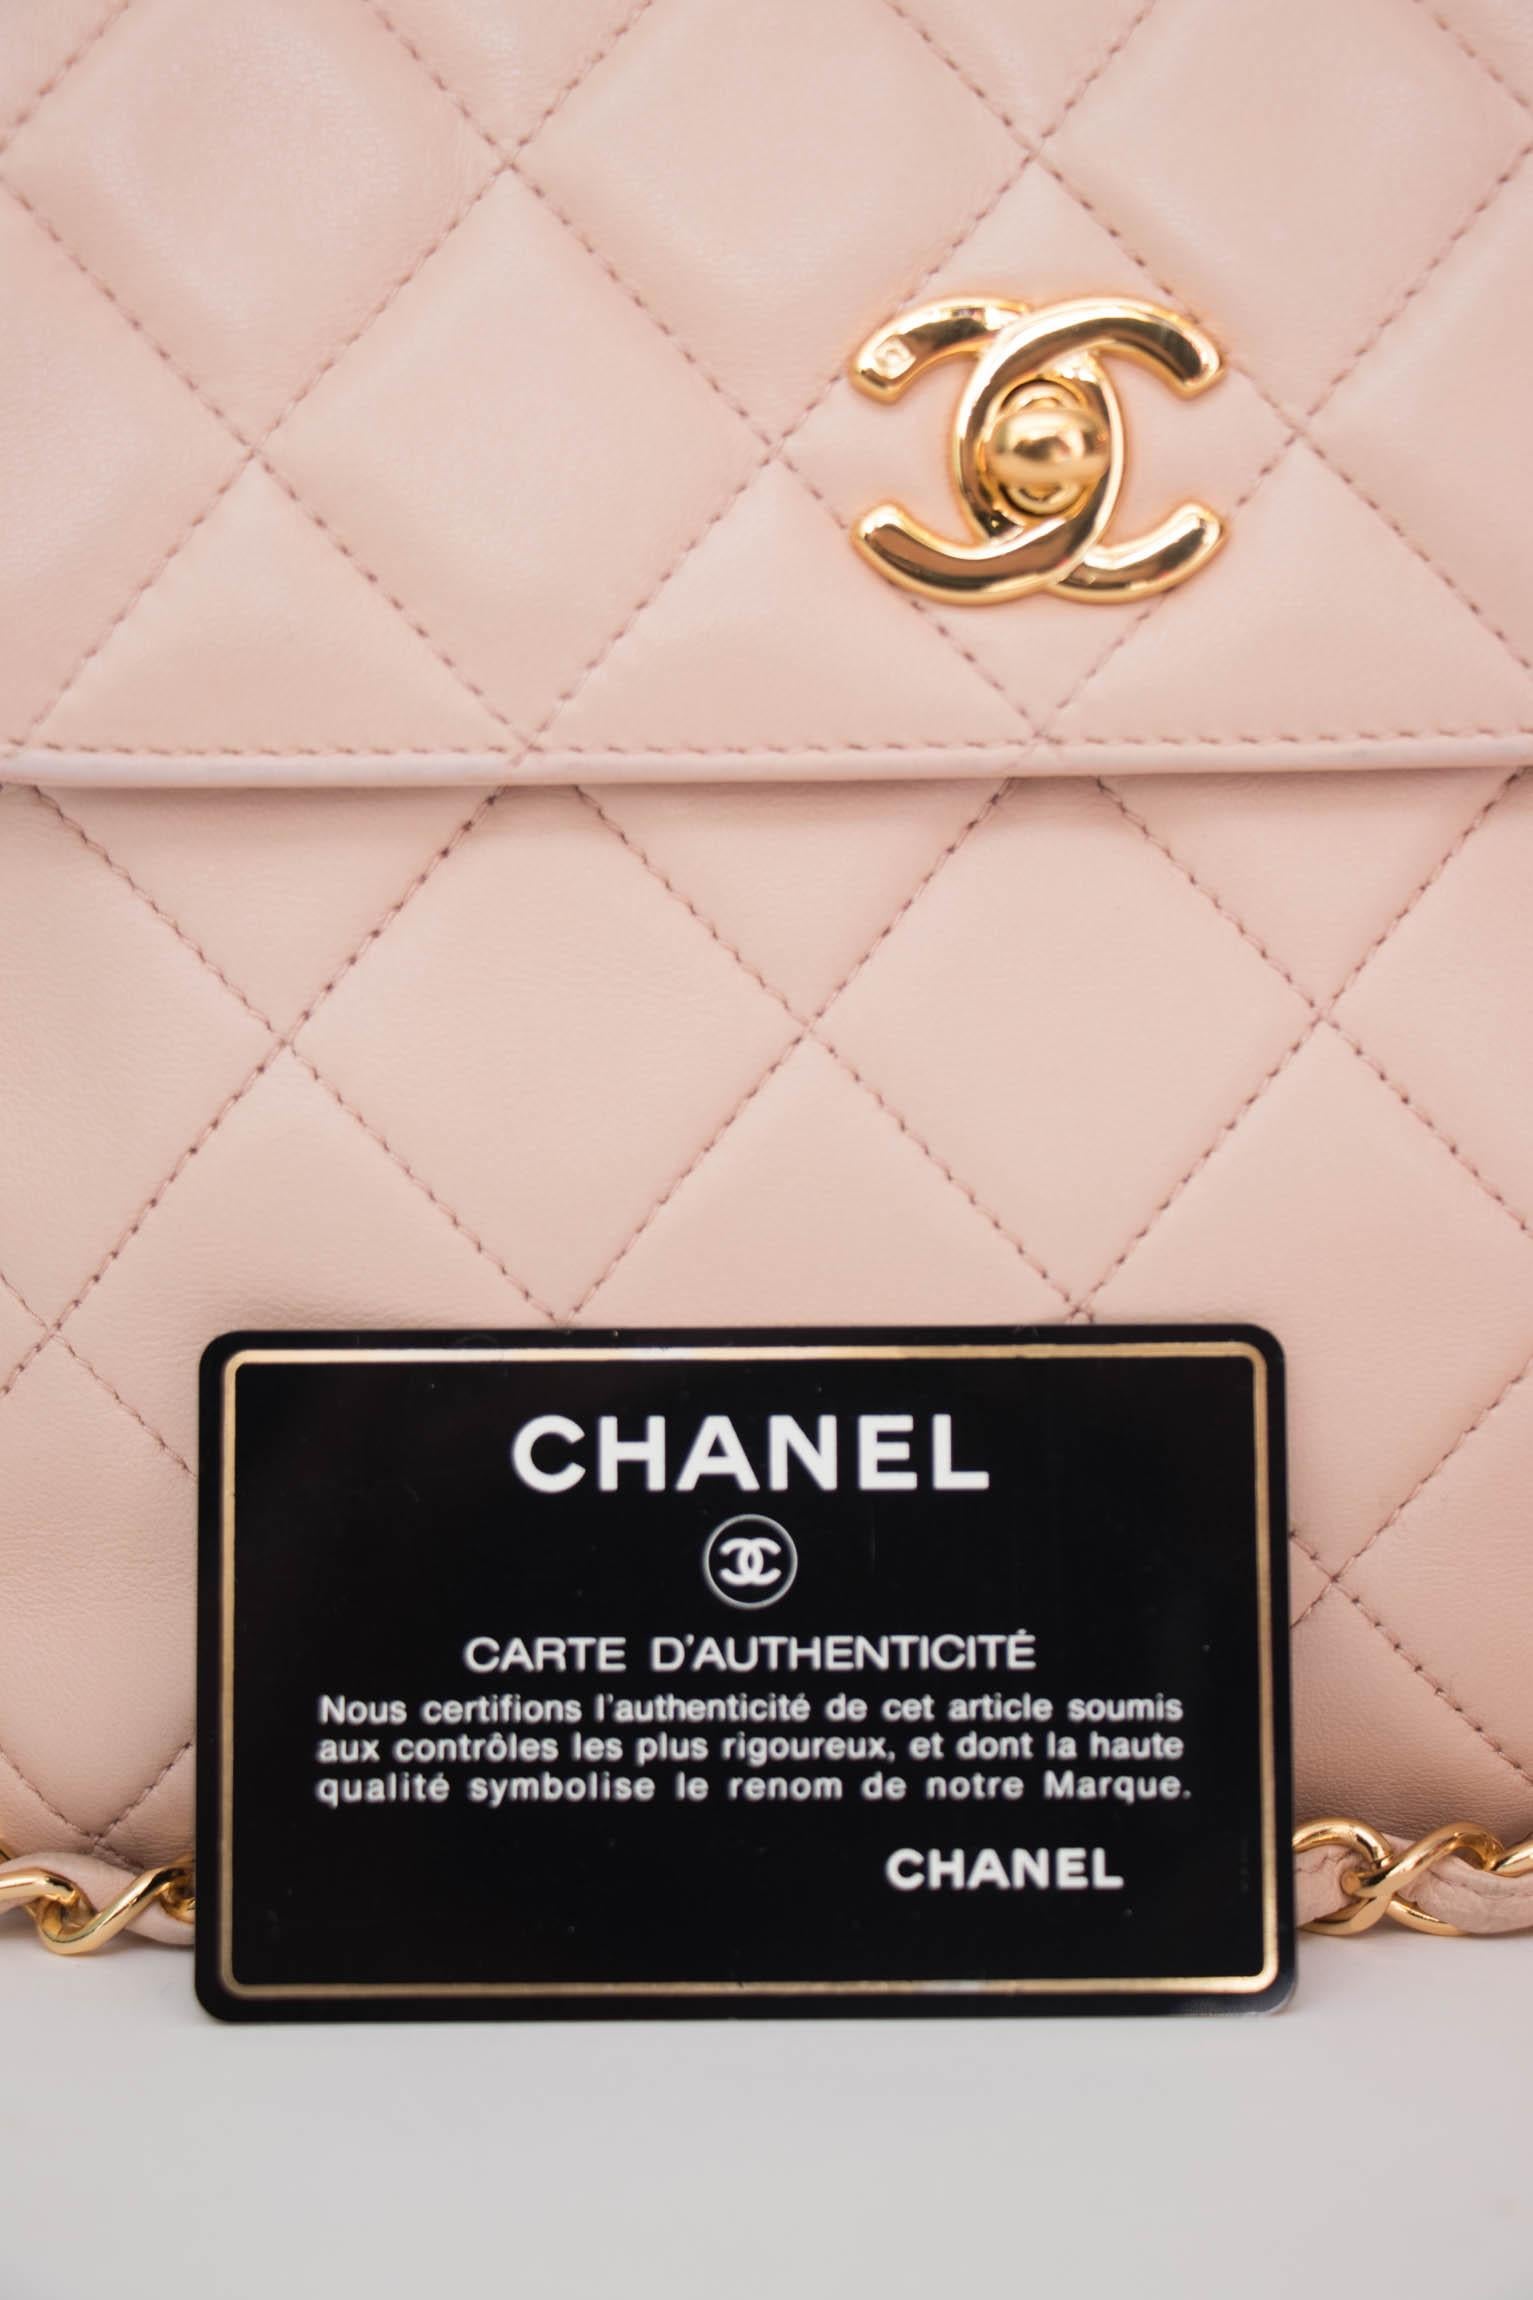 A 1990s pink Chanel lambskin square quilted shoulder bag with gold hardware, a chain strap and a small gold toned double 'c' logo buckle. The bag has one large inner compartment, a small pocket on the outer side and a small pocket on the inside with